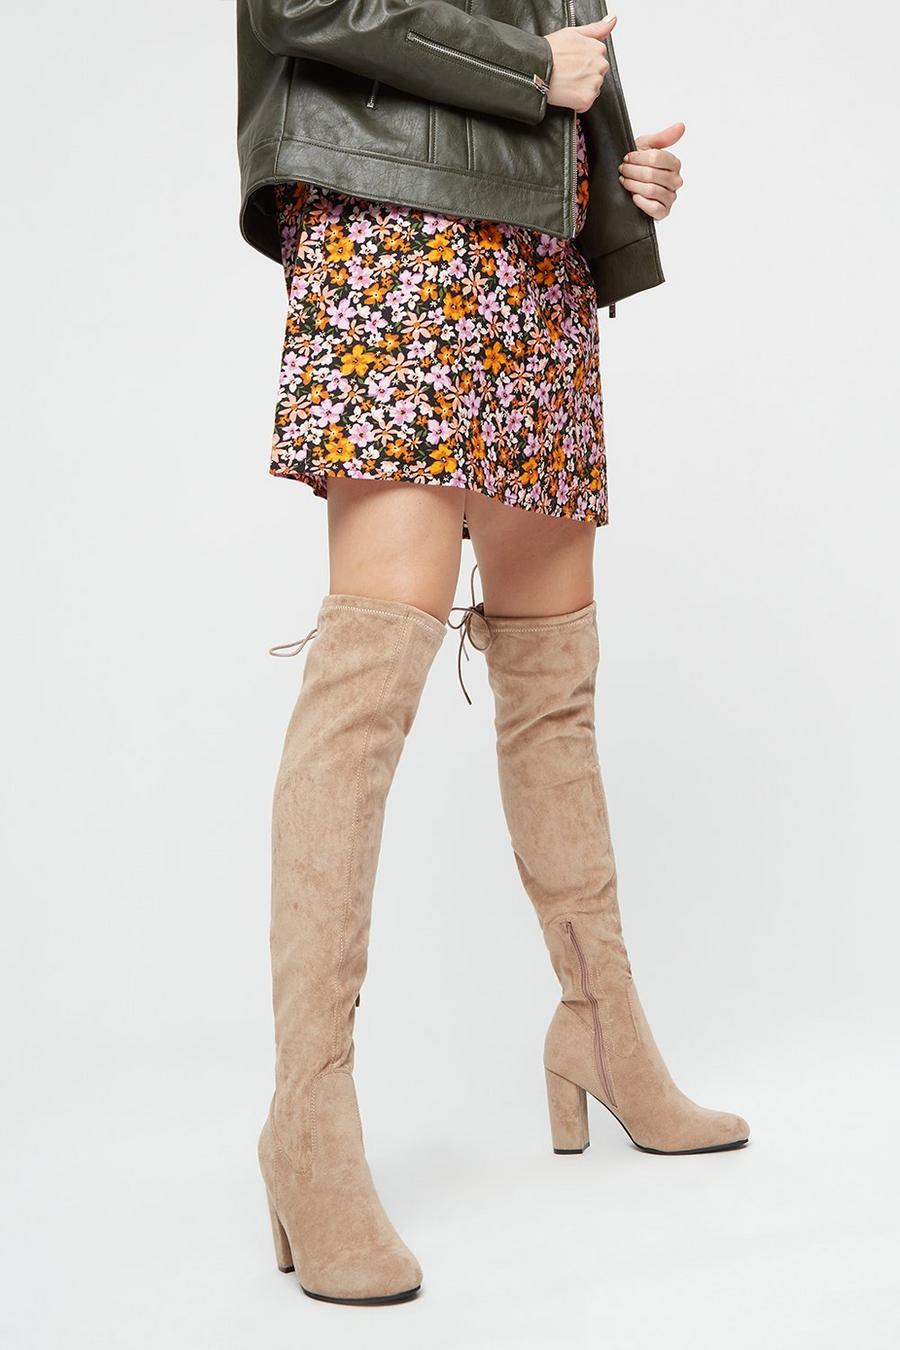 Hero Over The Knee Boots